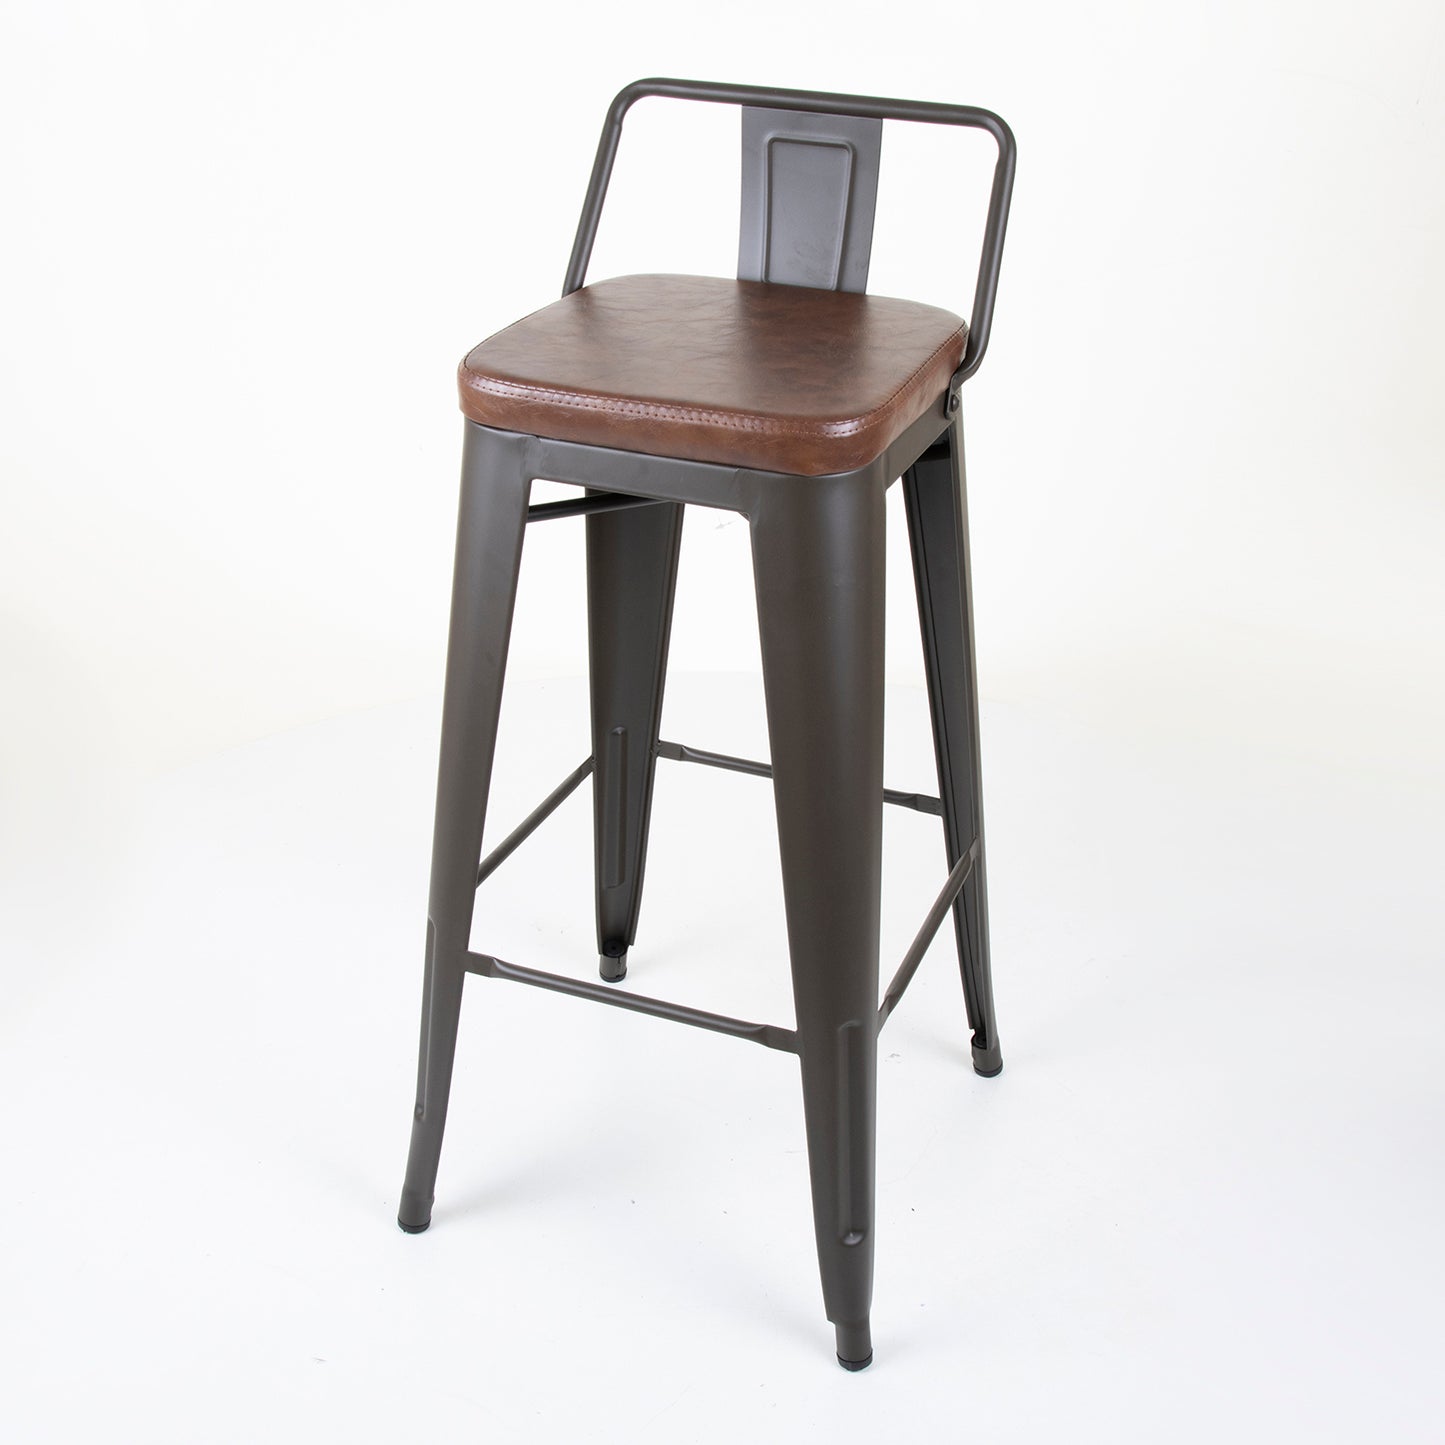 Set of 4 Rustic Bar Stools With Backrest